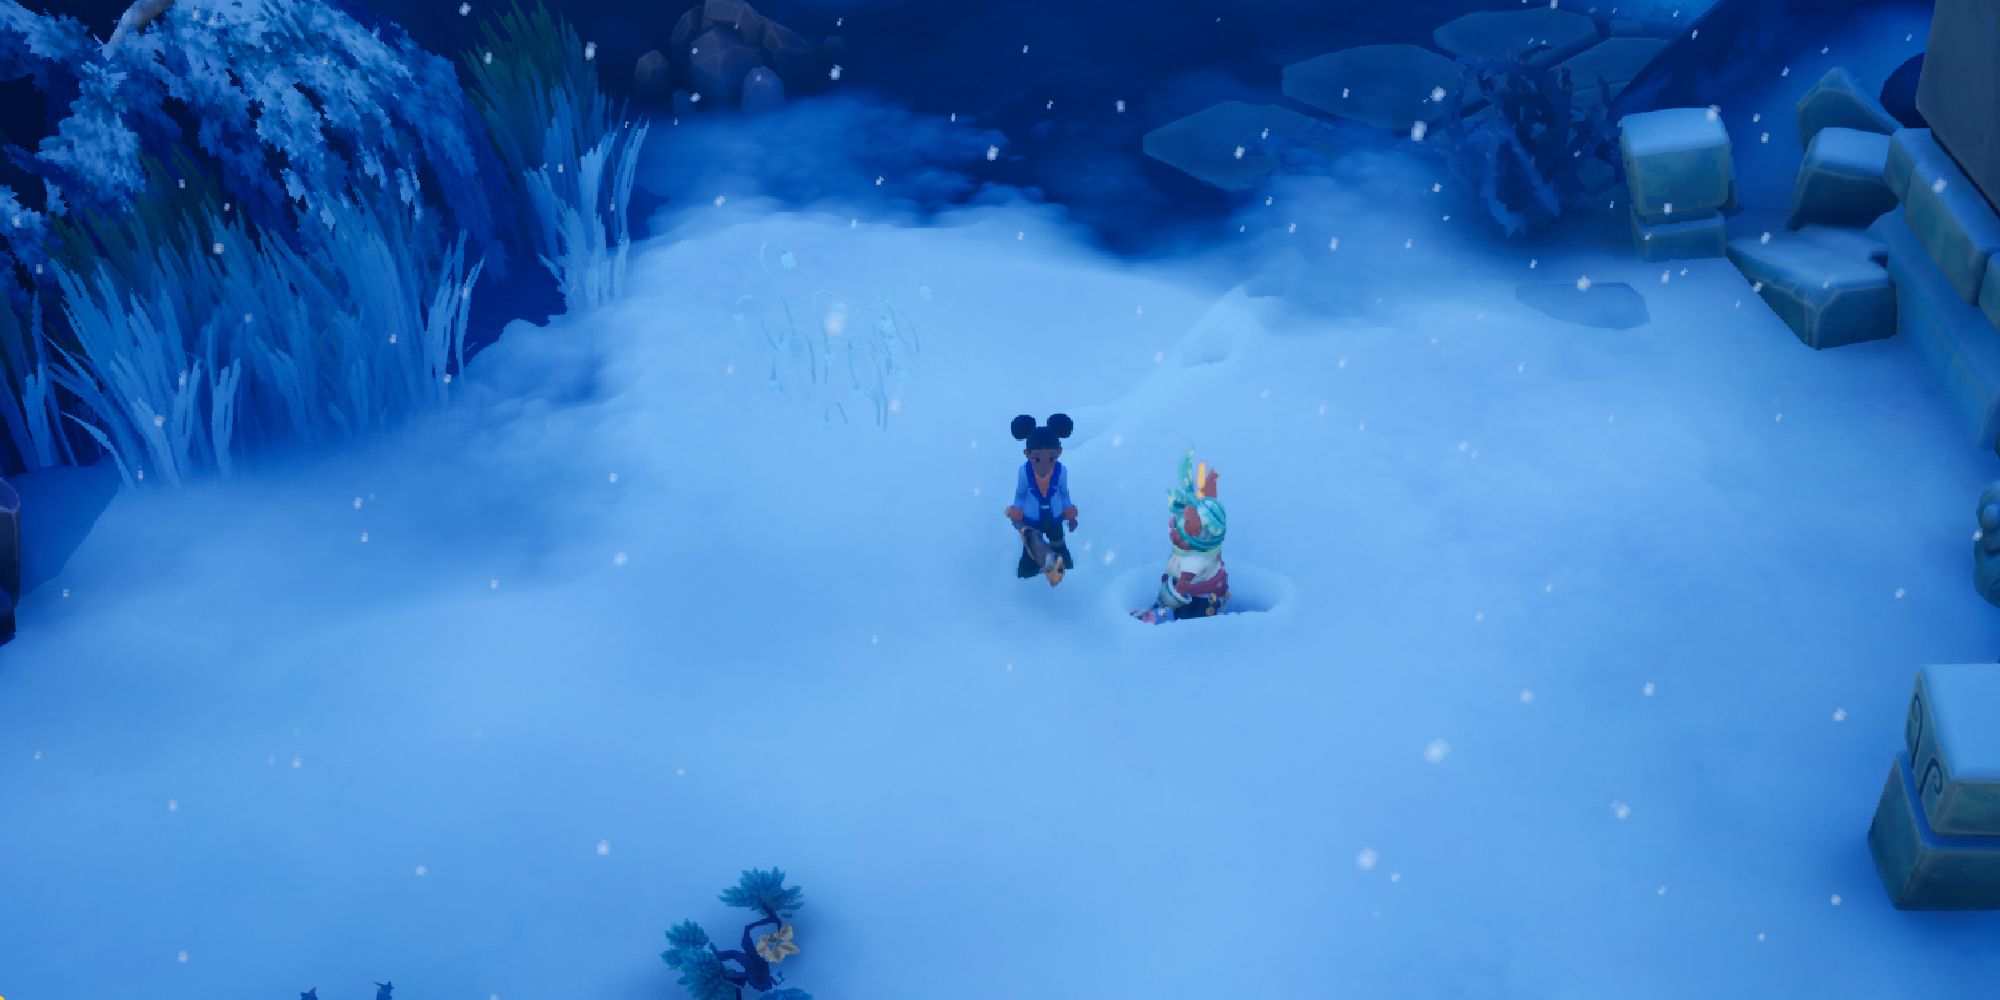 fiola and player standing in snow